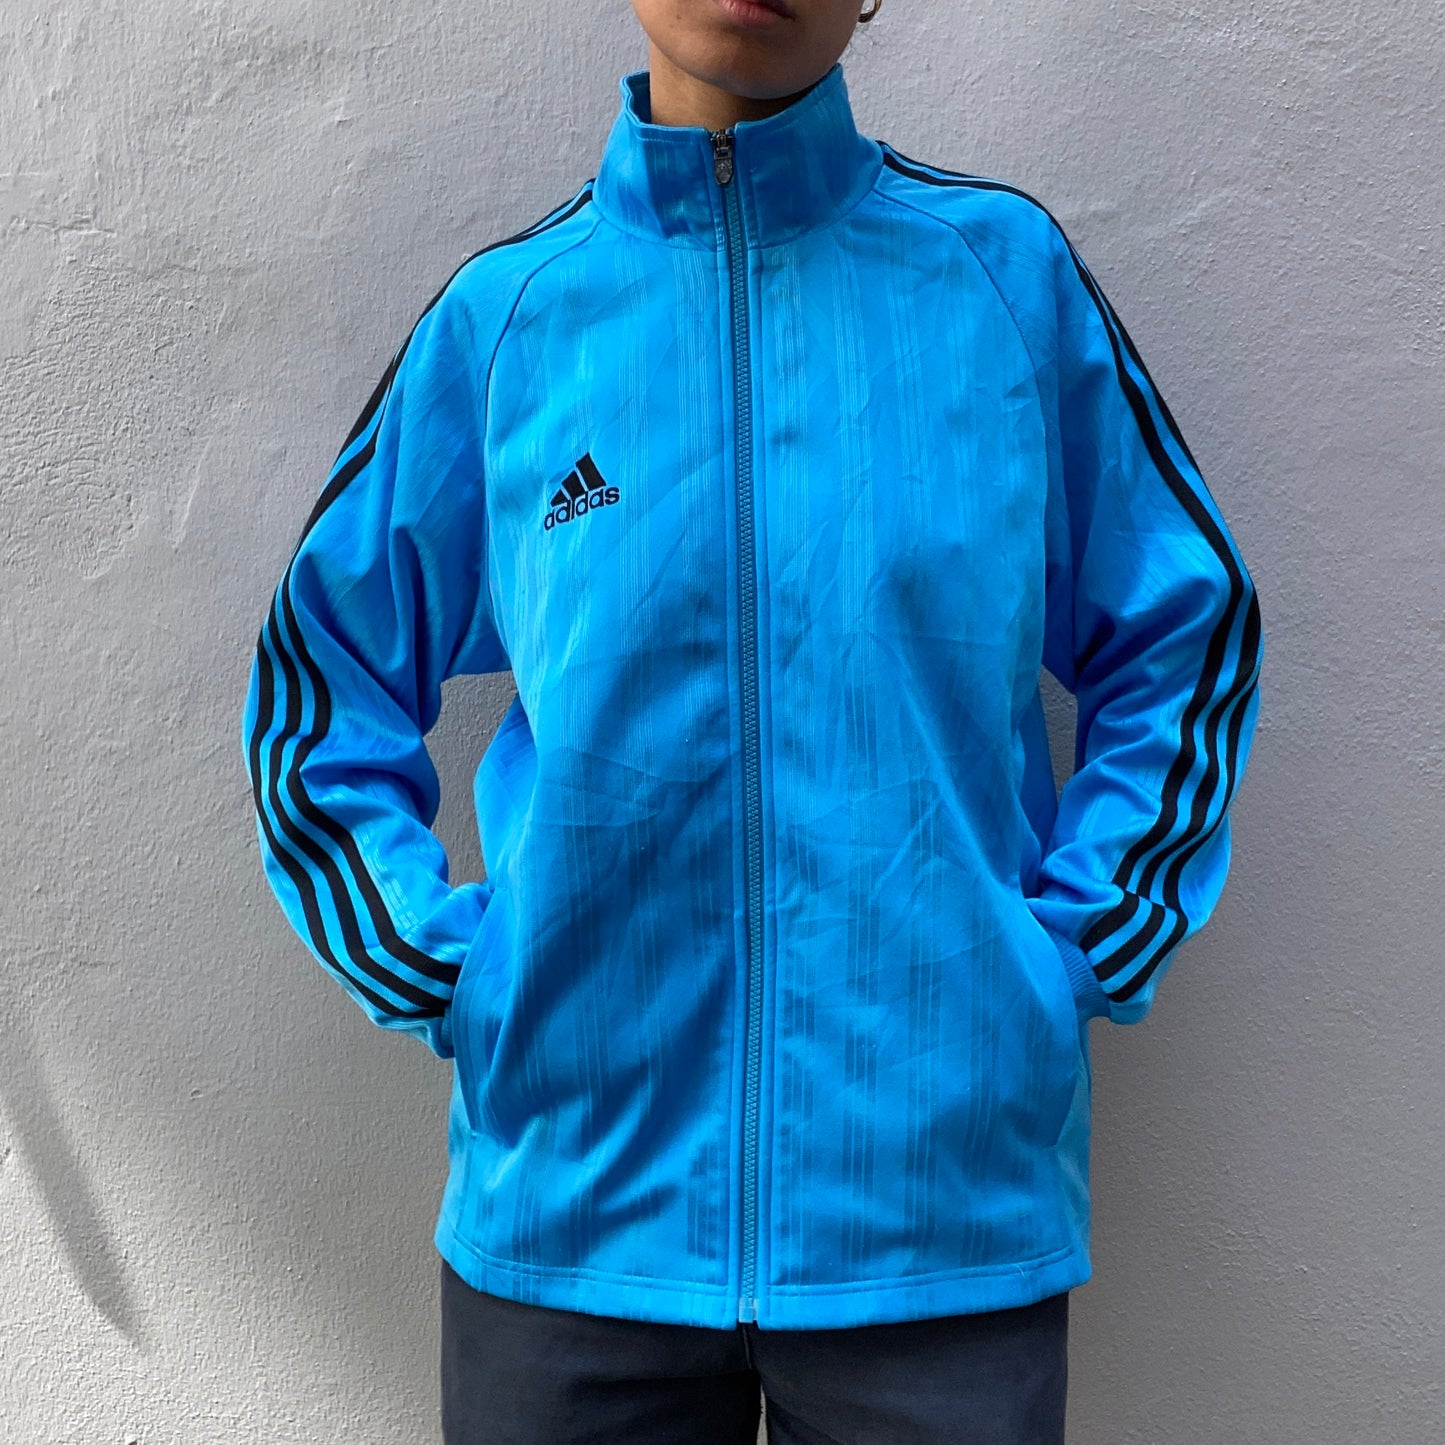 SkyBlue Adidas Track Suit front